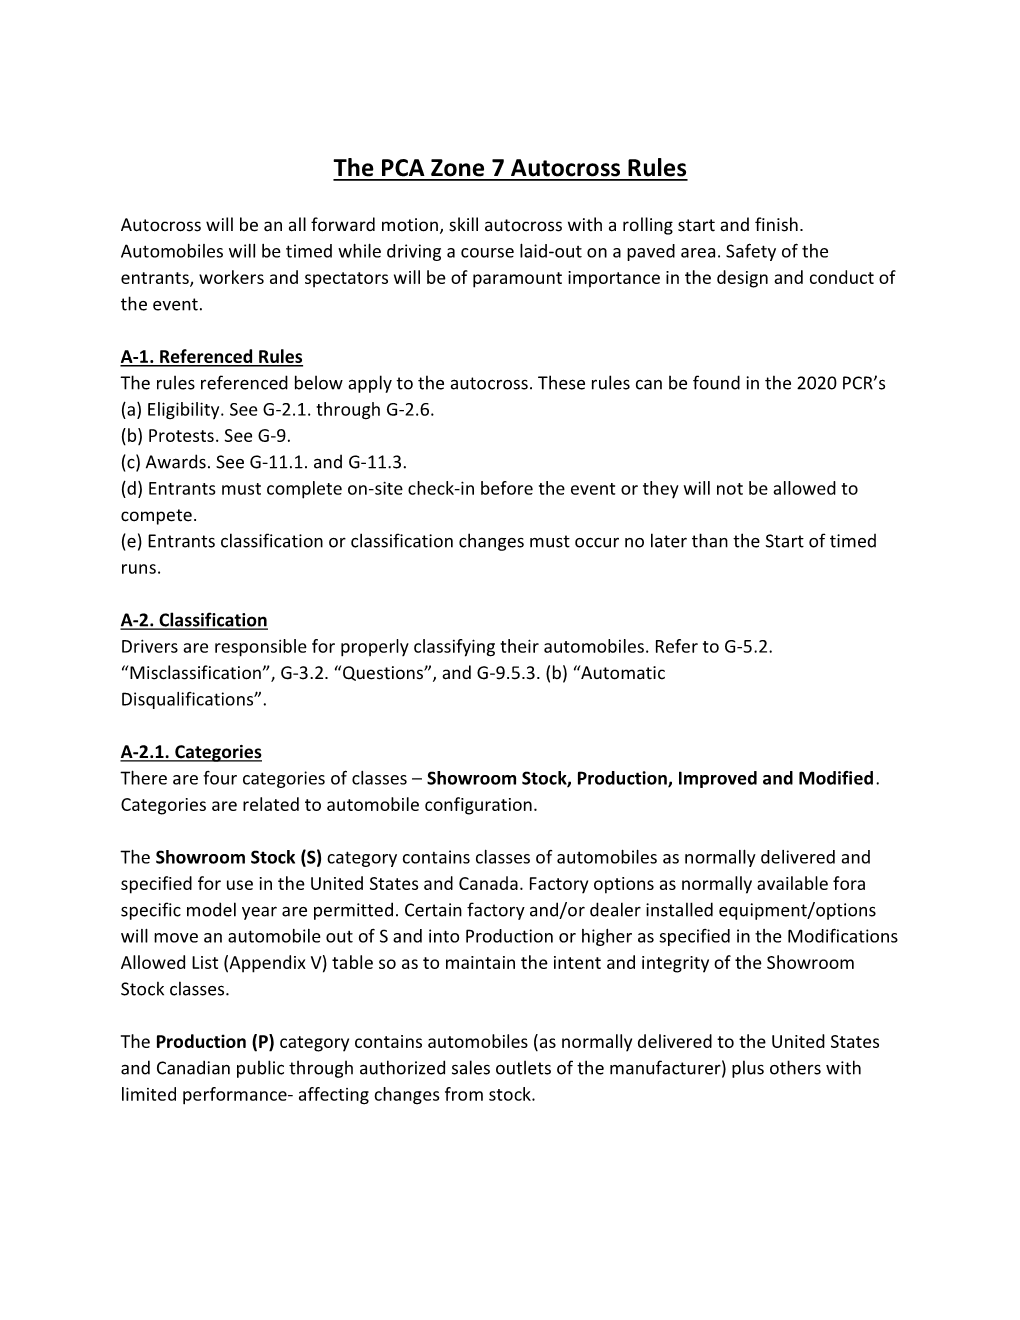 The PCA Zone 7 Autocross Rules